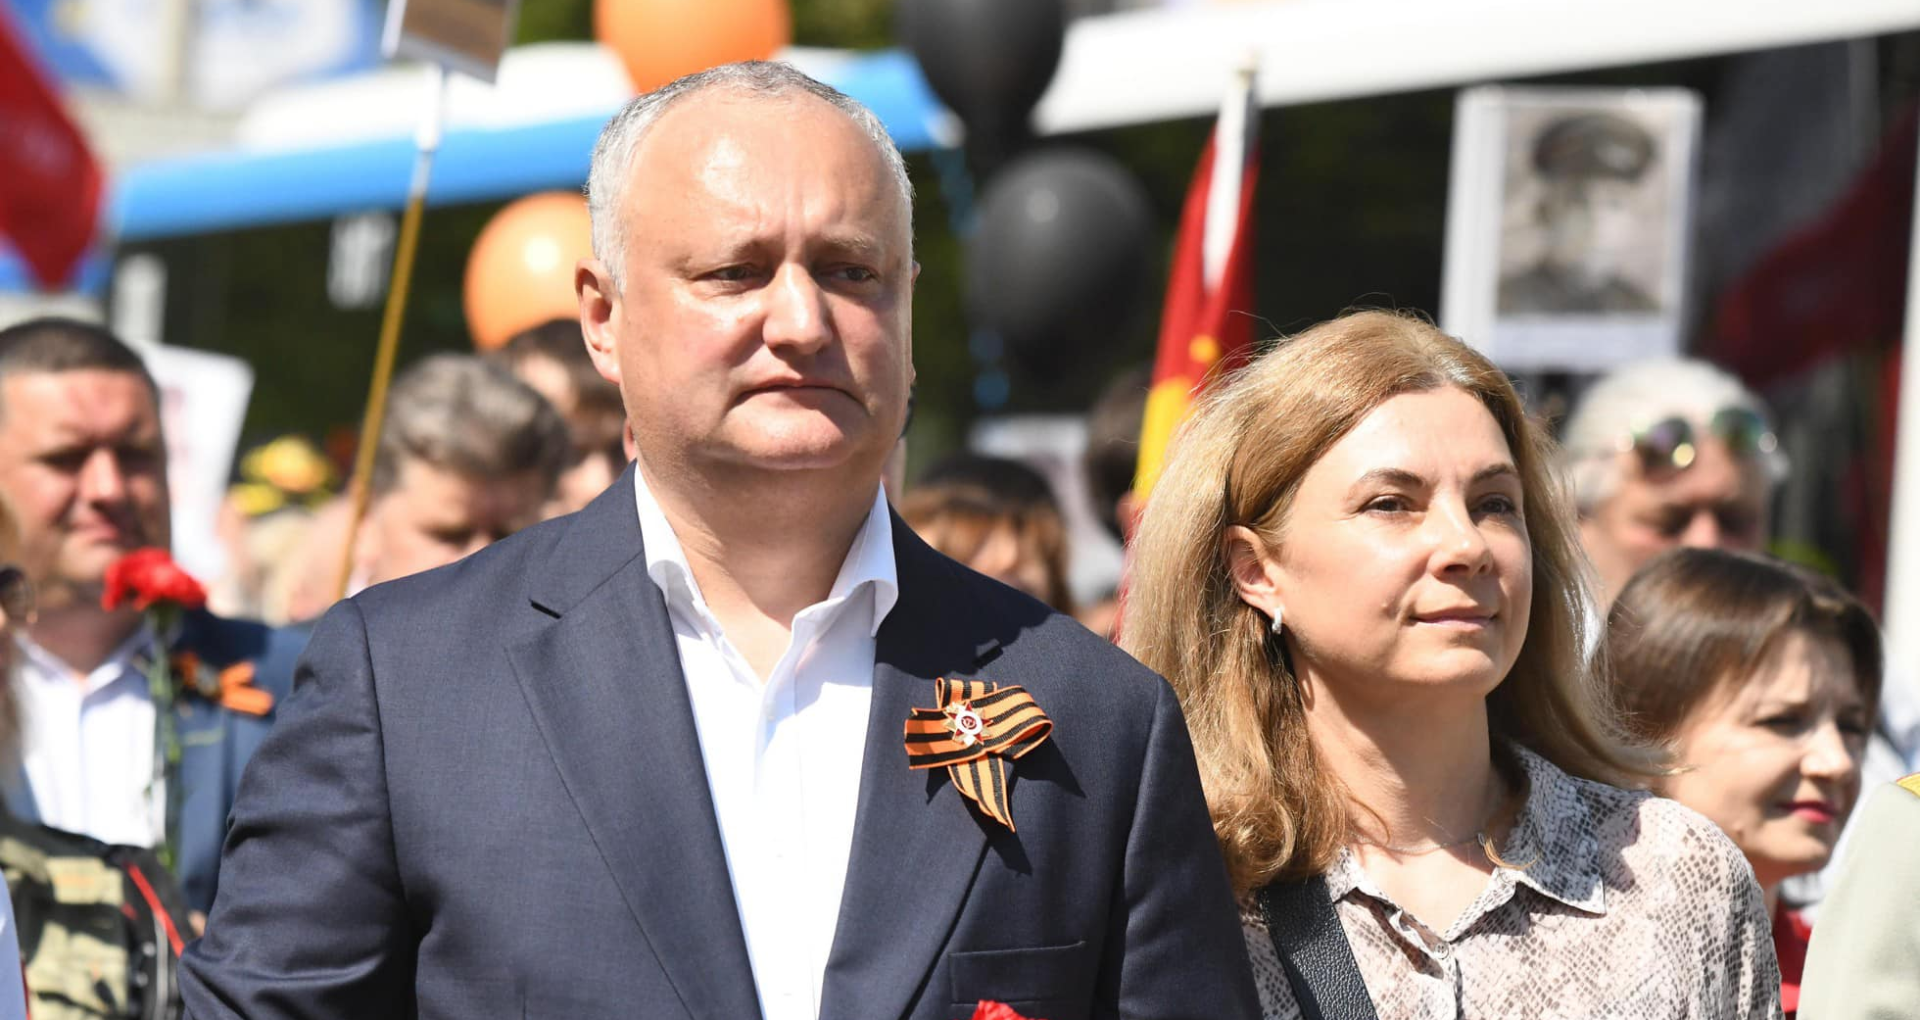 Anti-corruption prosecutors accuse Vlad Plahotniuc’s lawyers of delaying the completion of the criminal prosecution in his absence in the “Bank Fraud” case